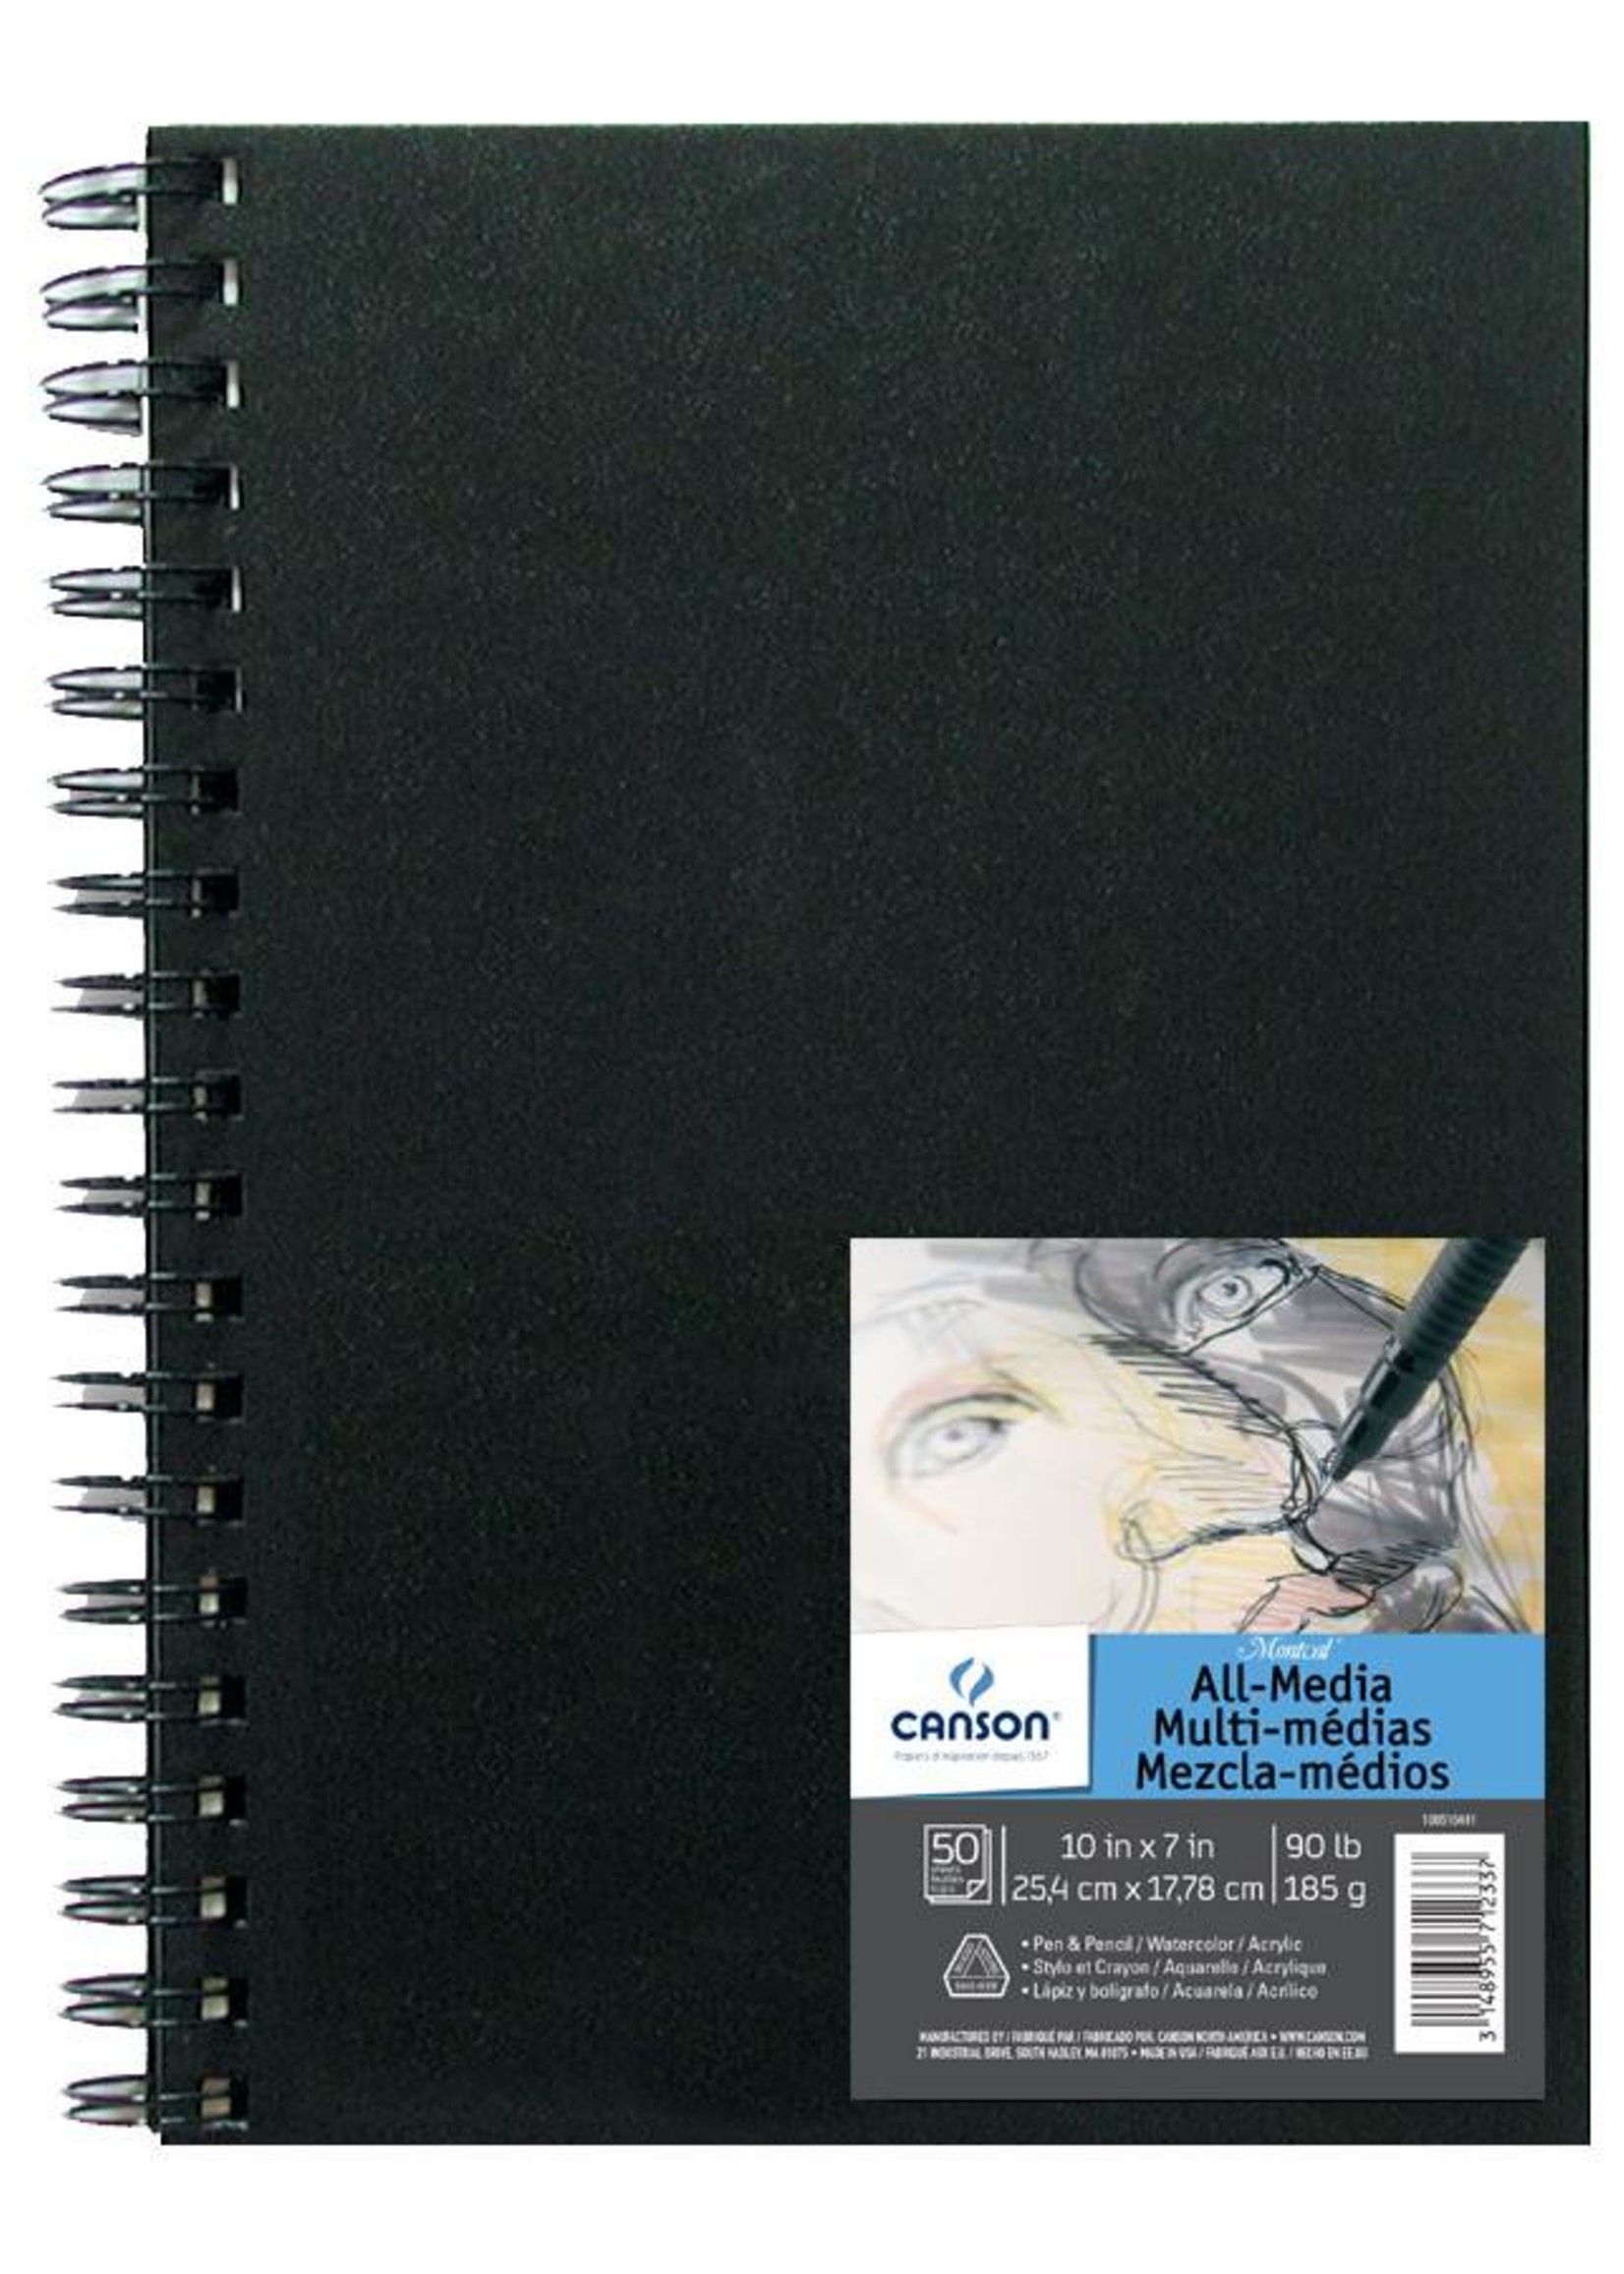 CANSON CANSON MONTVAL ALL-MEDIA FIELD BOOK 90LB 9X12 HARDCOVER SIDE COIL  50/SHT    CAN-100510441